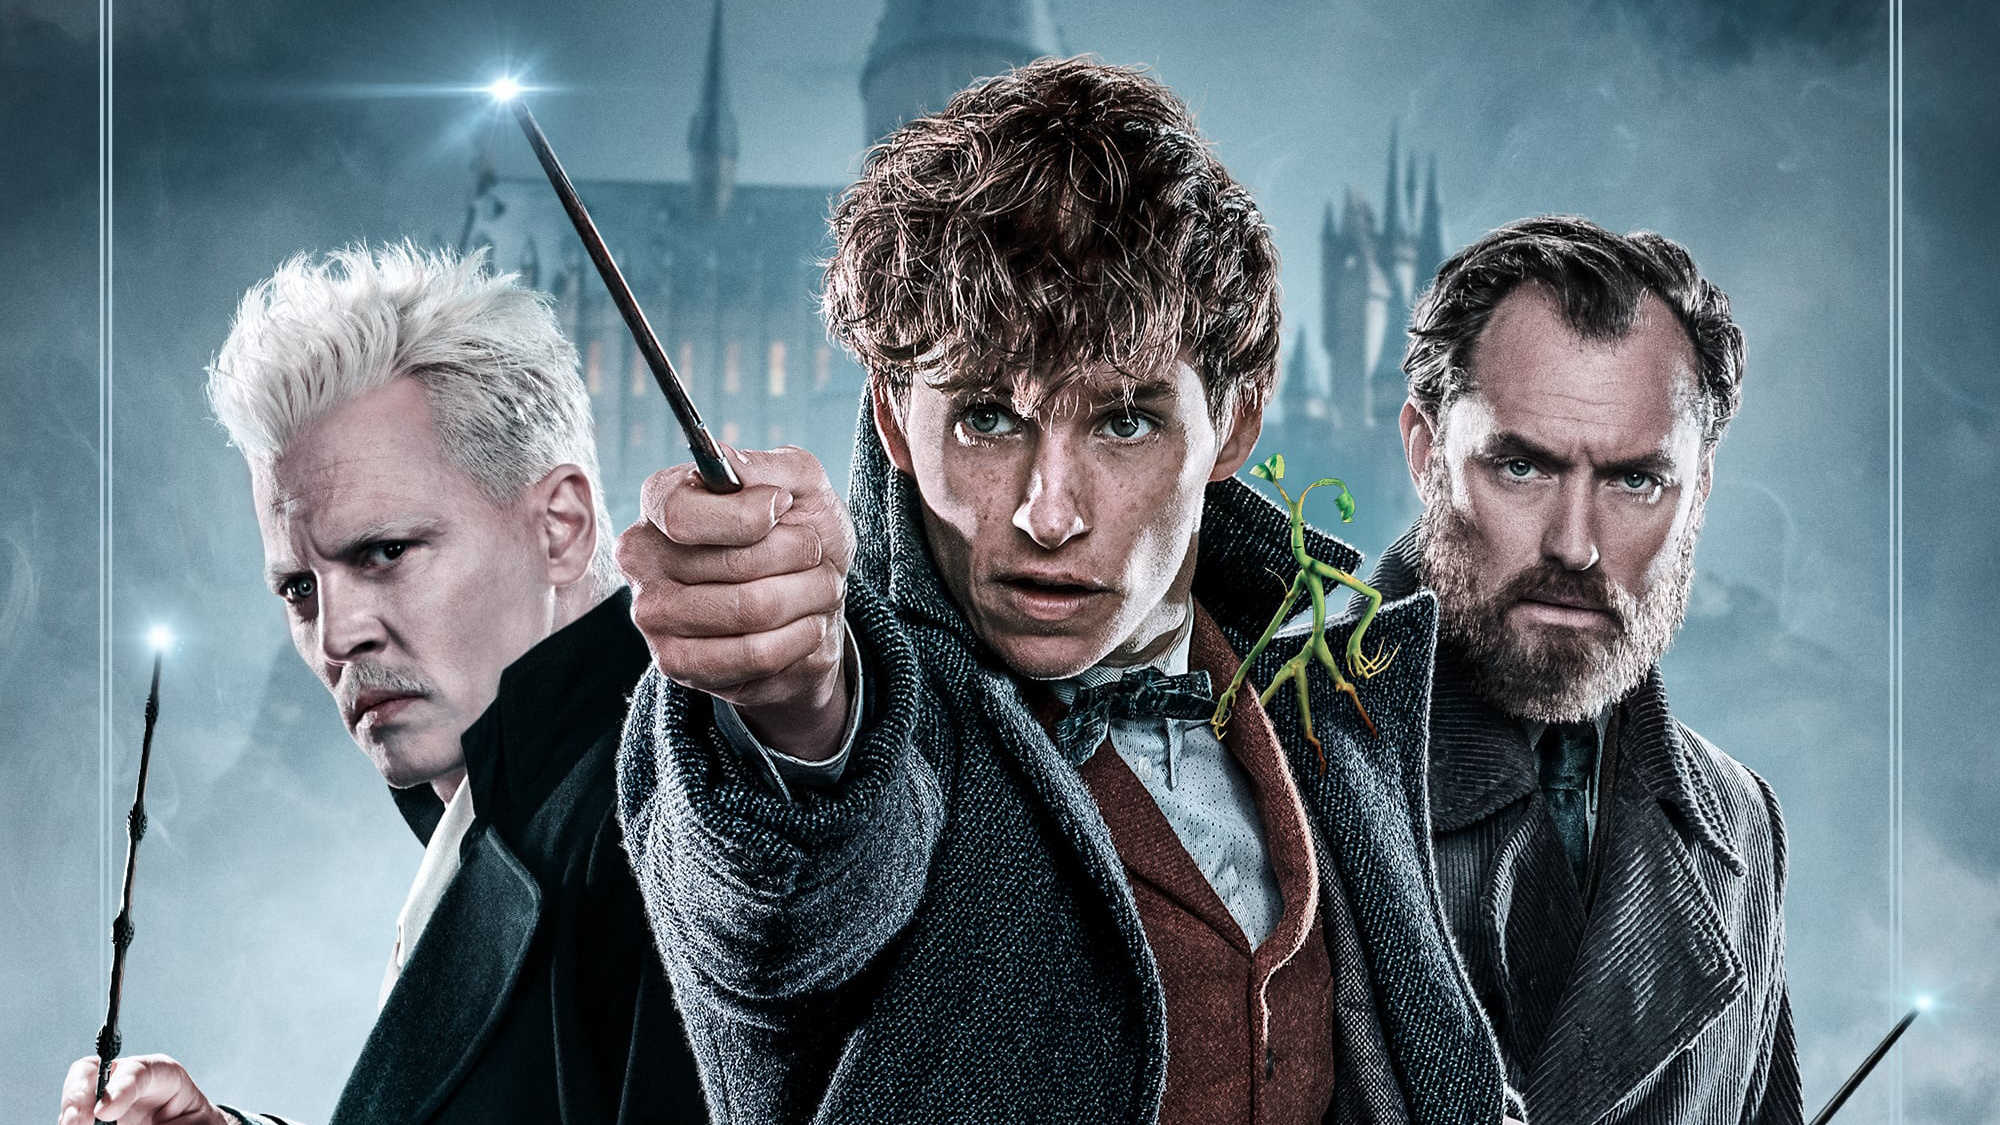 Crimes of Grindelwald movie, New poster, HD wallpapers, MovieMania, 2000x1130 HD Desktop